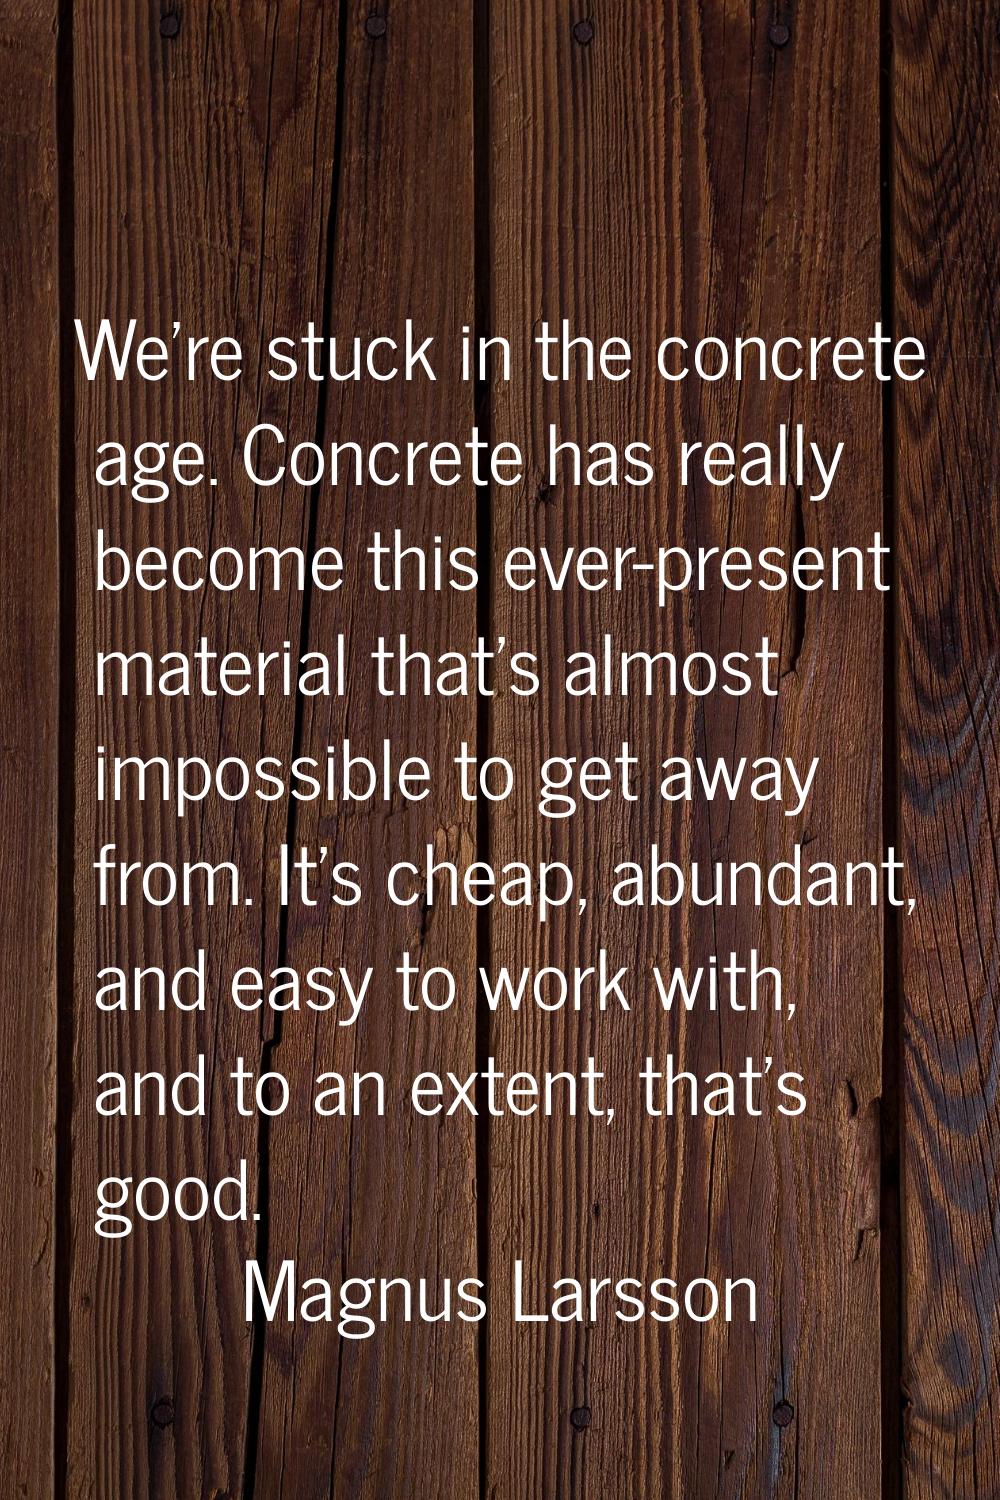 We're stuck in the concrete age. Concrete has really become this ever-present material that's almos